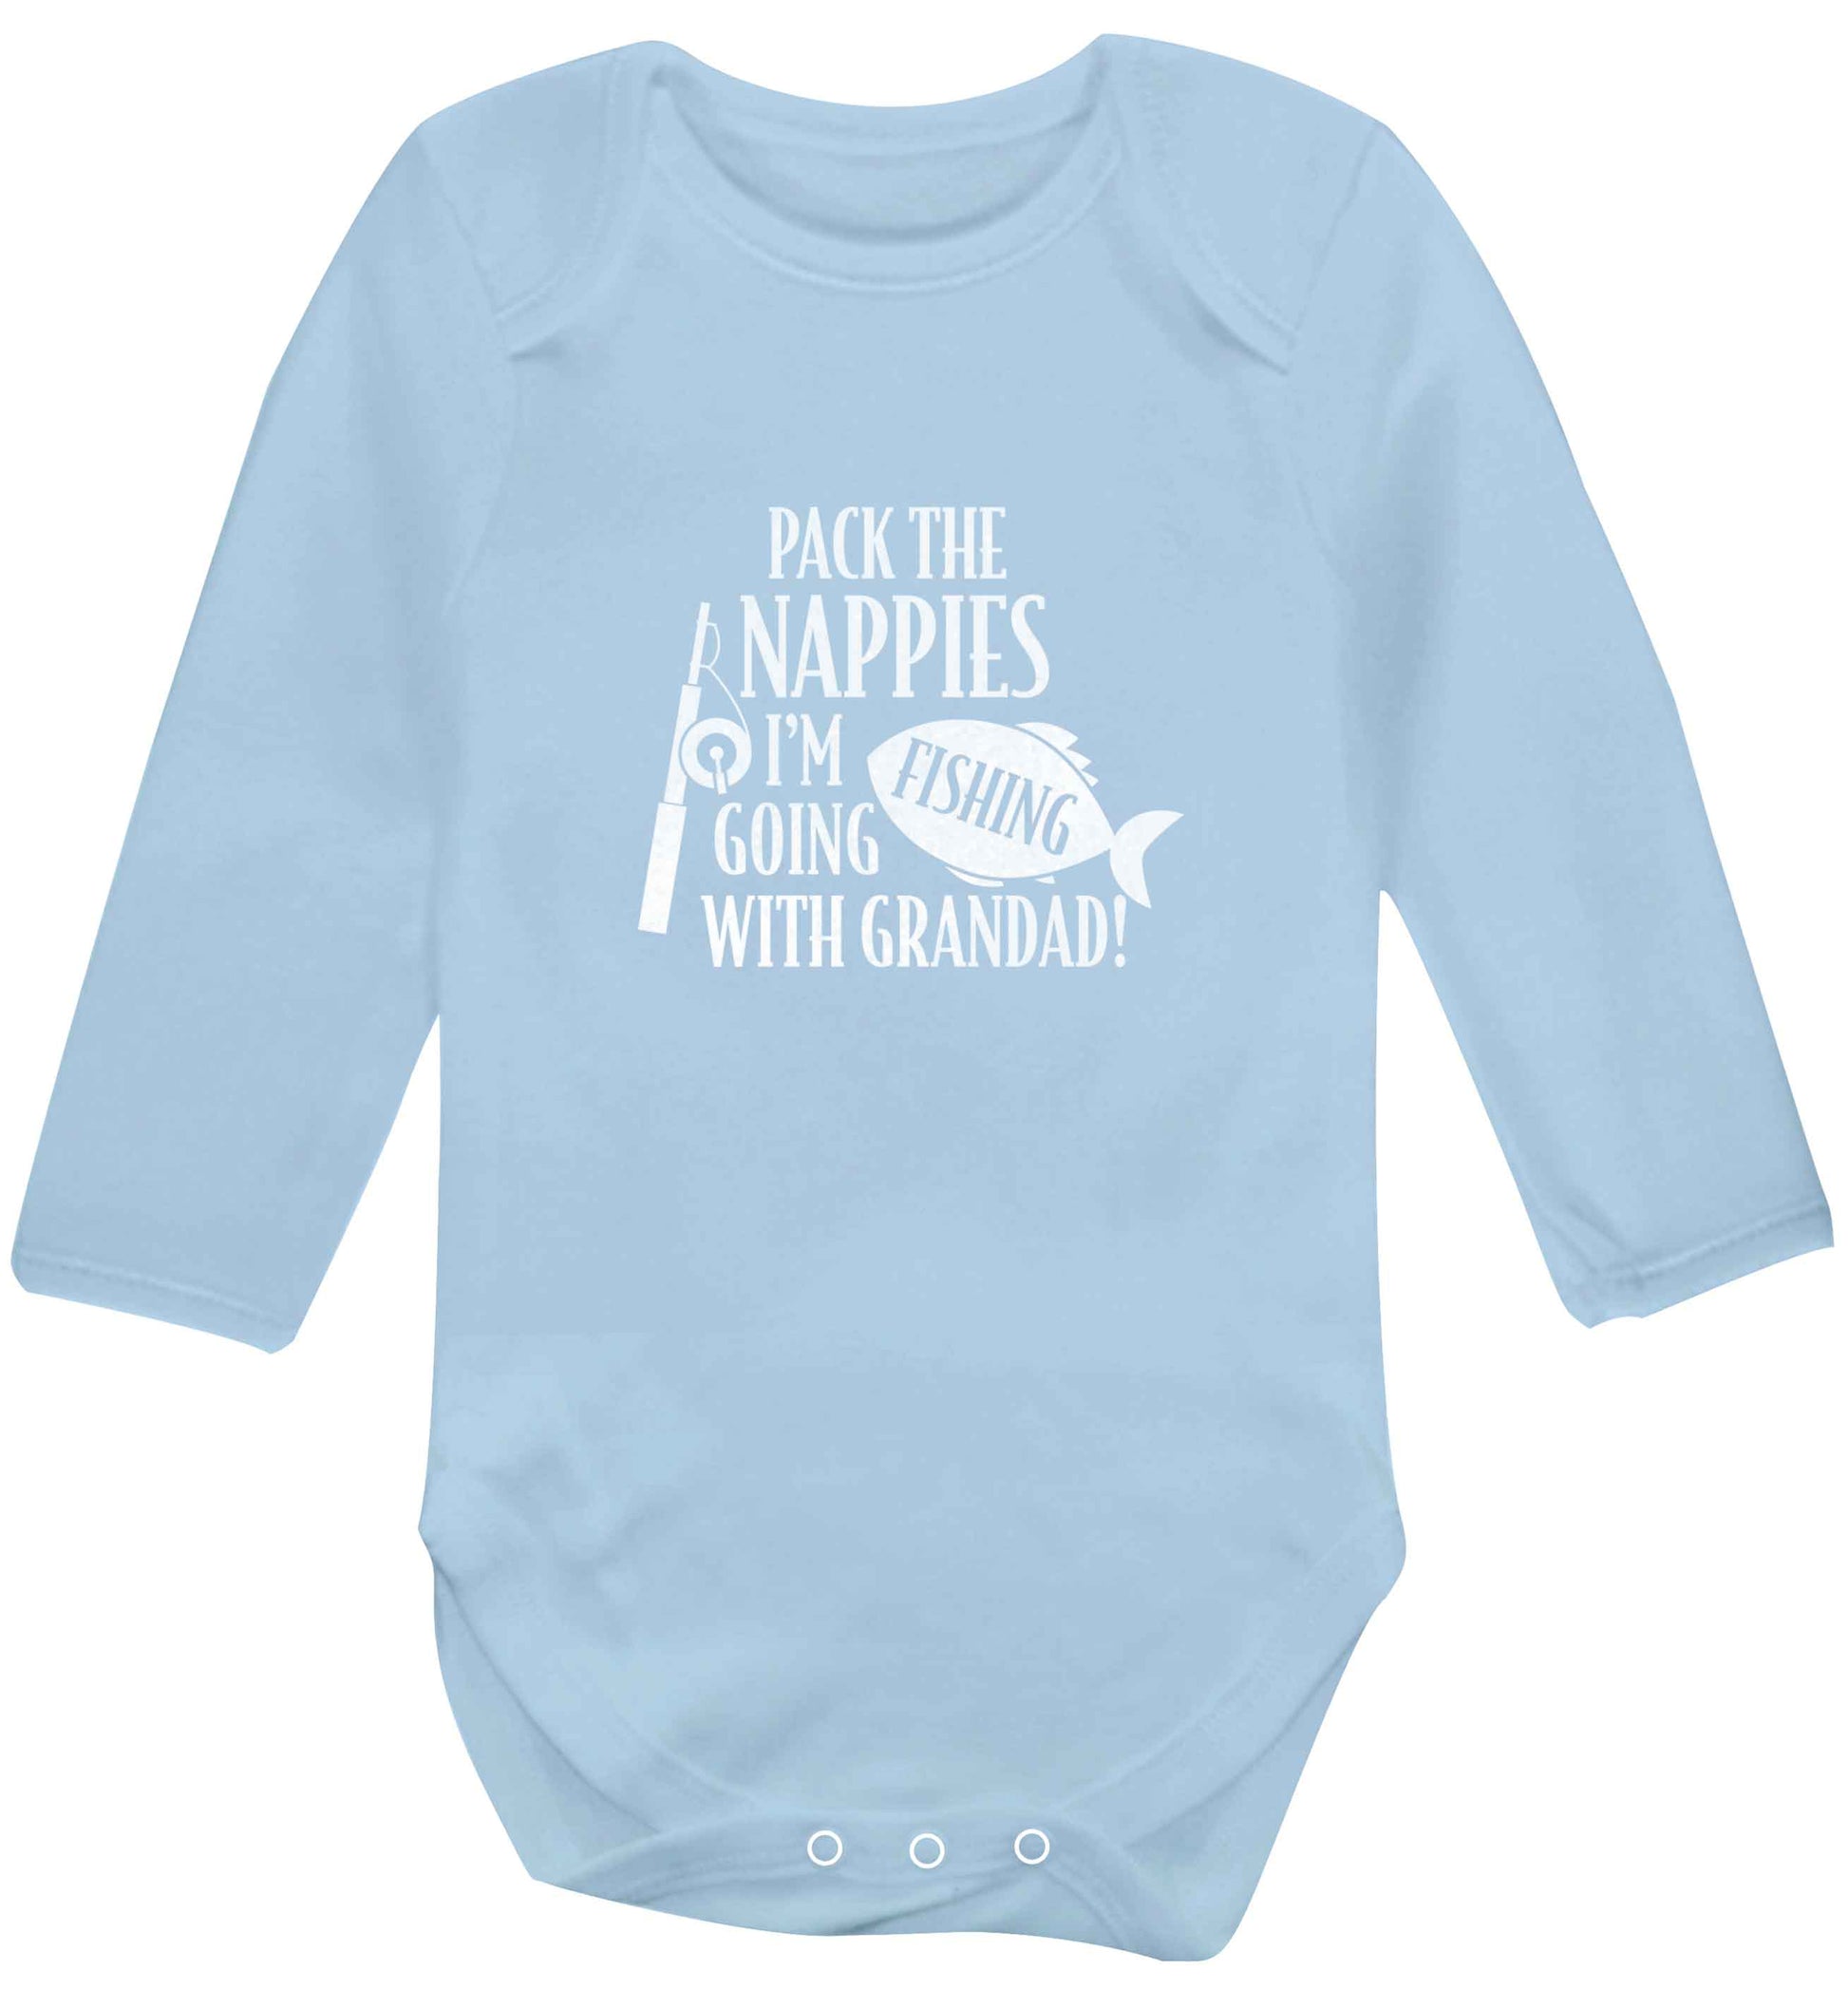 Pack the nappies I'm going fishing with Grandad baby vest long sleeved pale blue 6-12 months